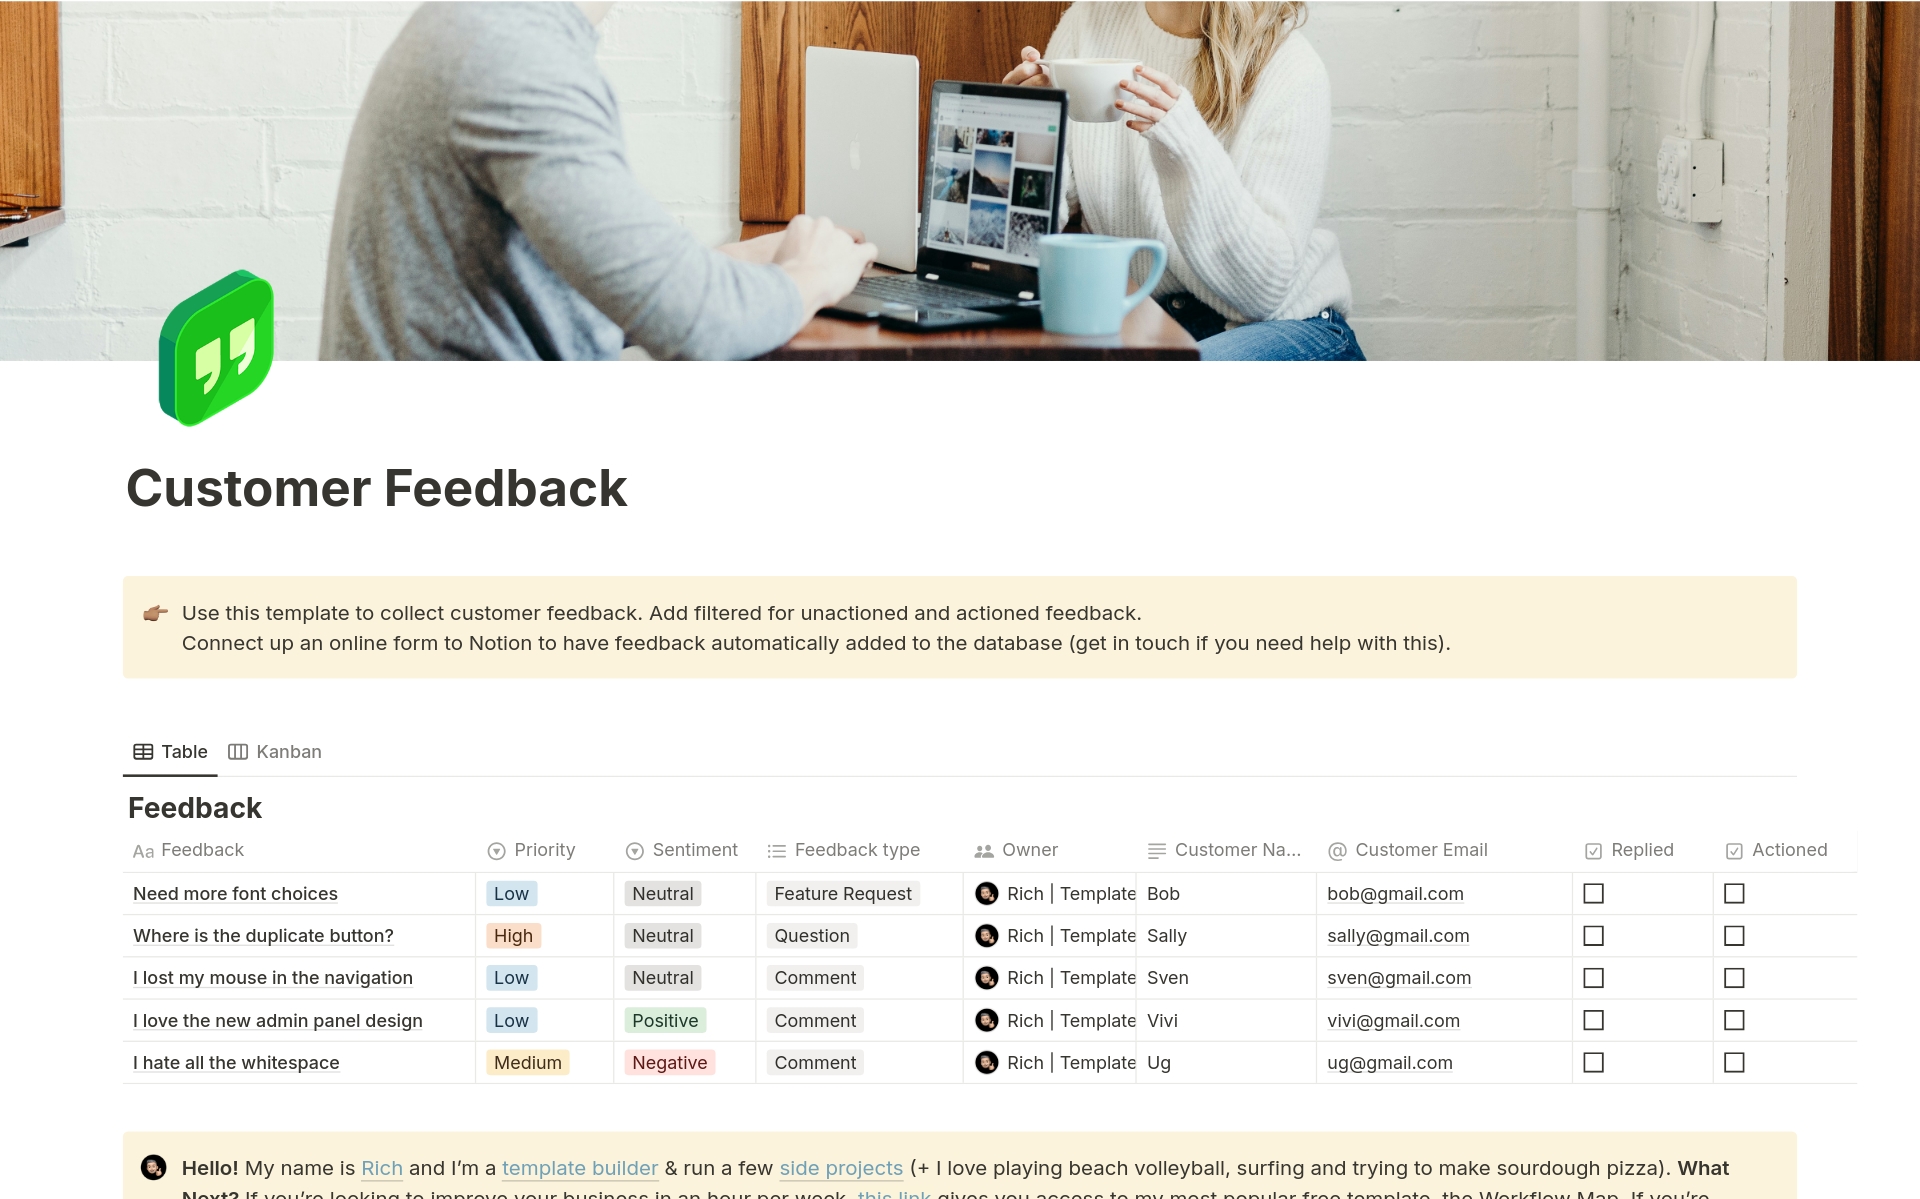 This template is perfect for organising the outreach, collection and curation of customer feedback in one place.